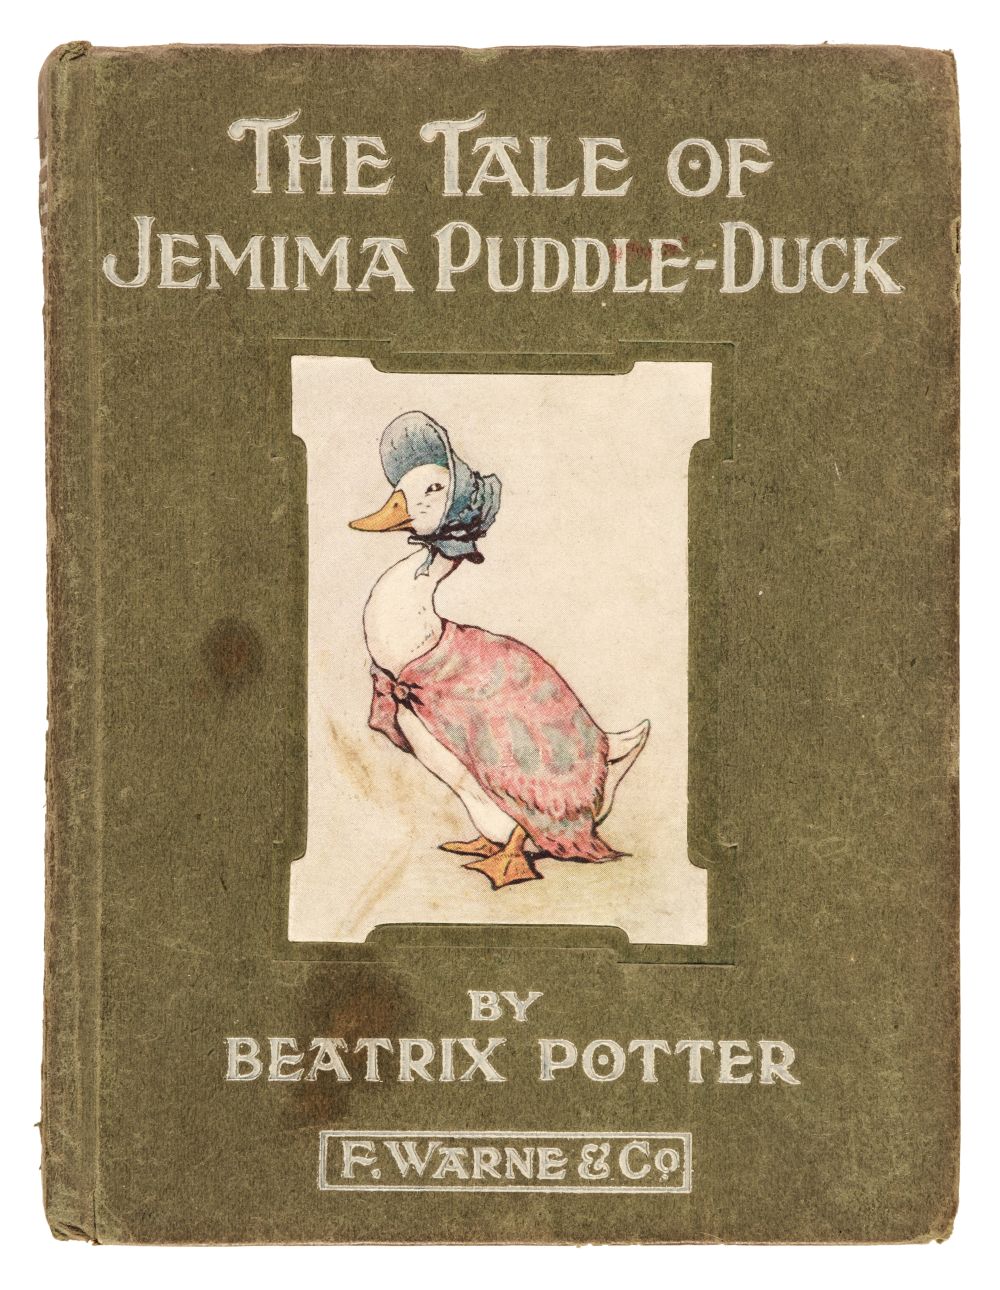 Potter (Beatrix). The Tale of Jemima Puddle-Duck, 1st edition, London: F. Warne & Co, 1908